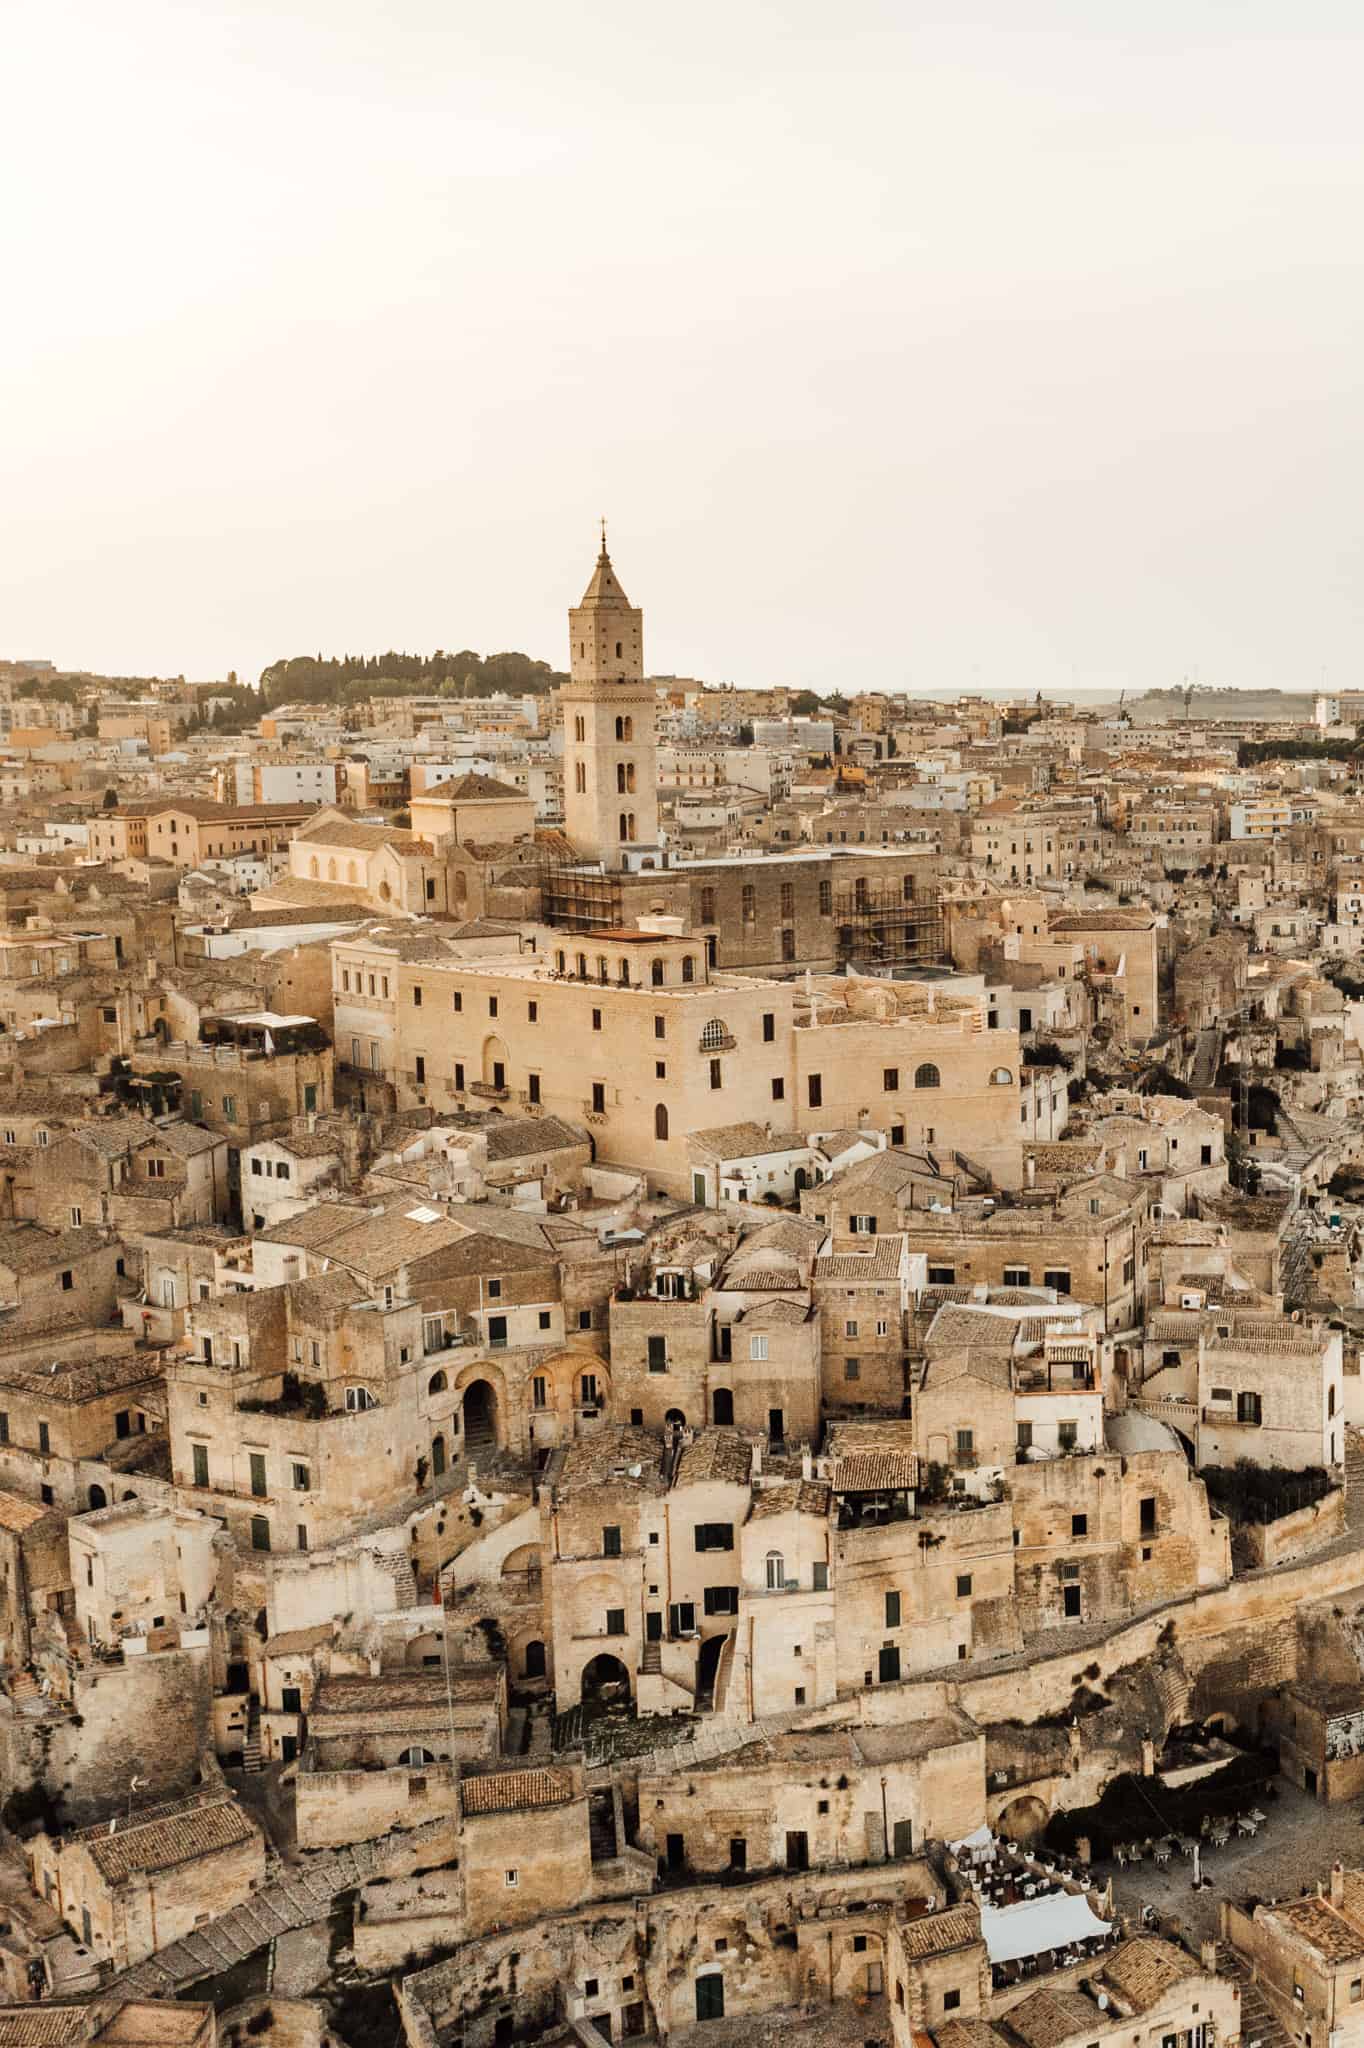 Drone view of Matera, Italy